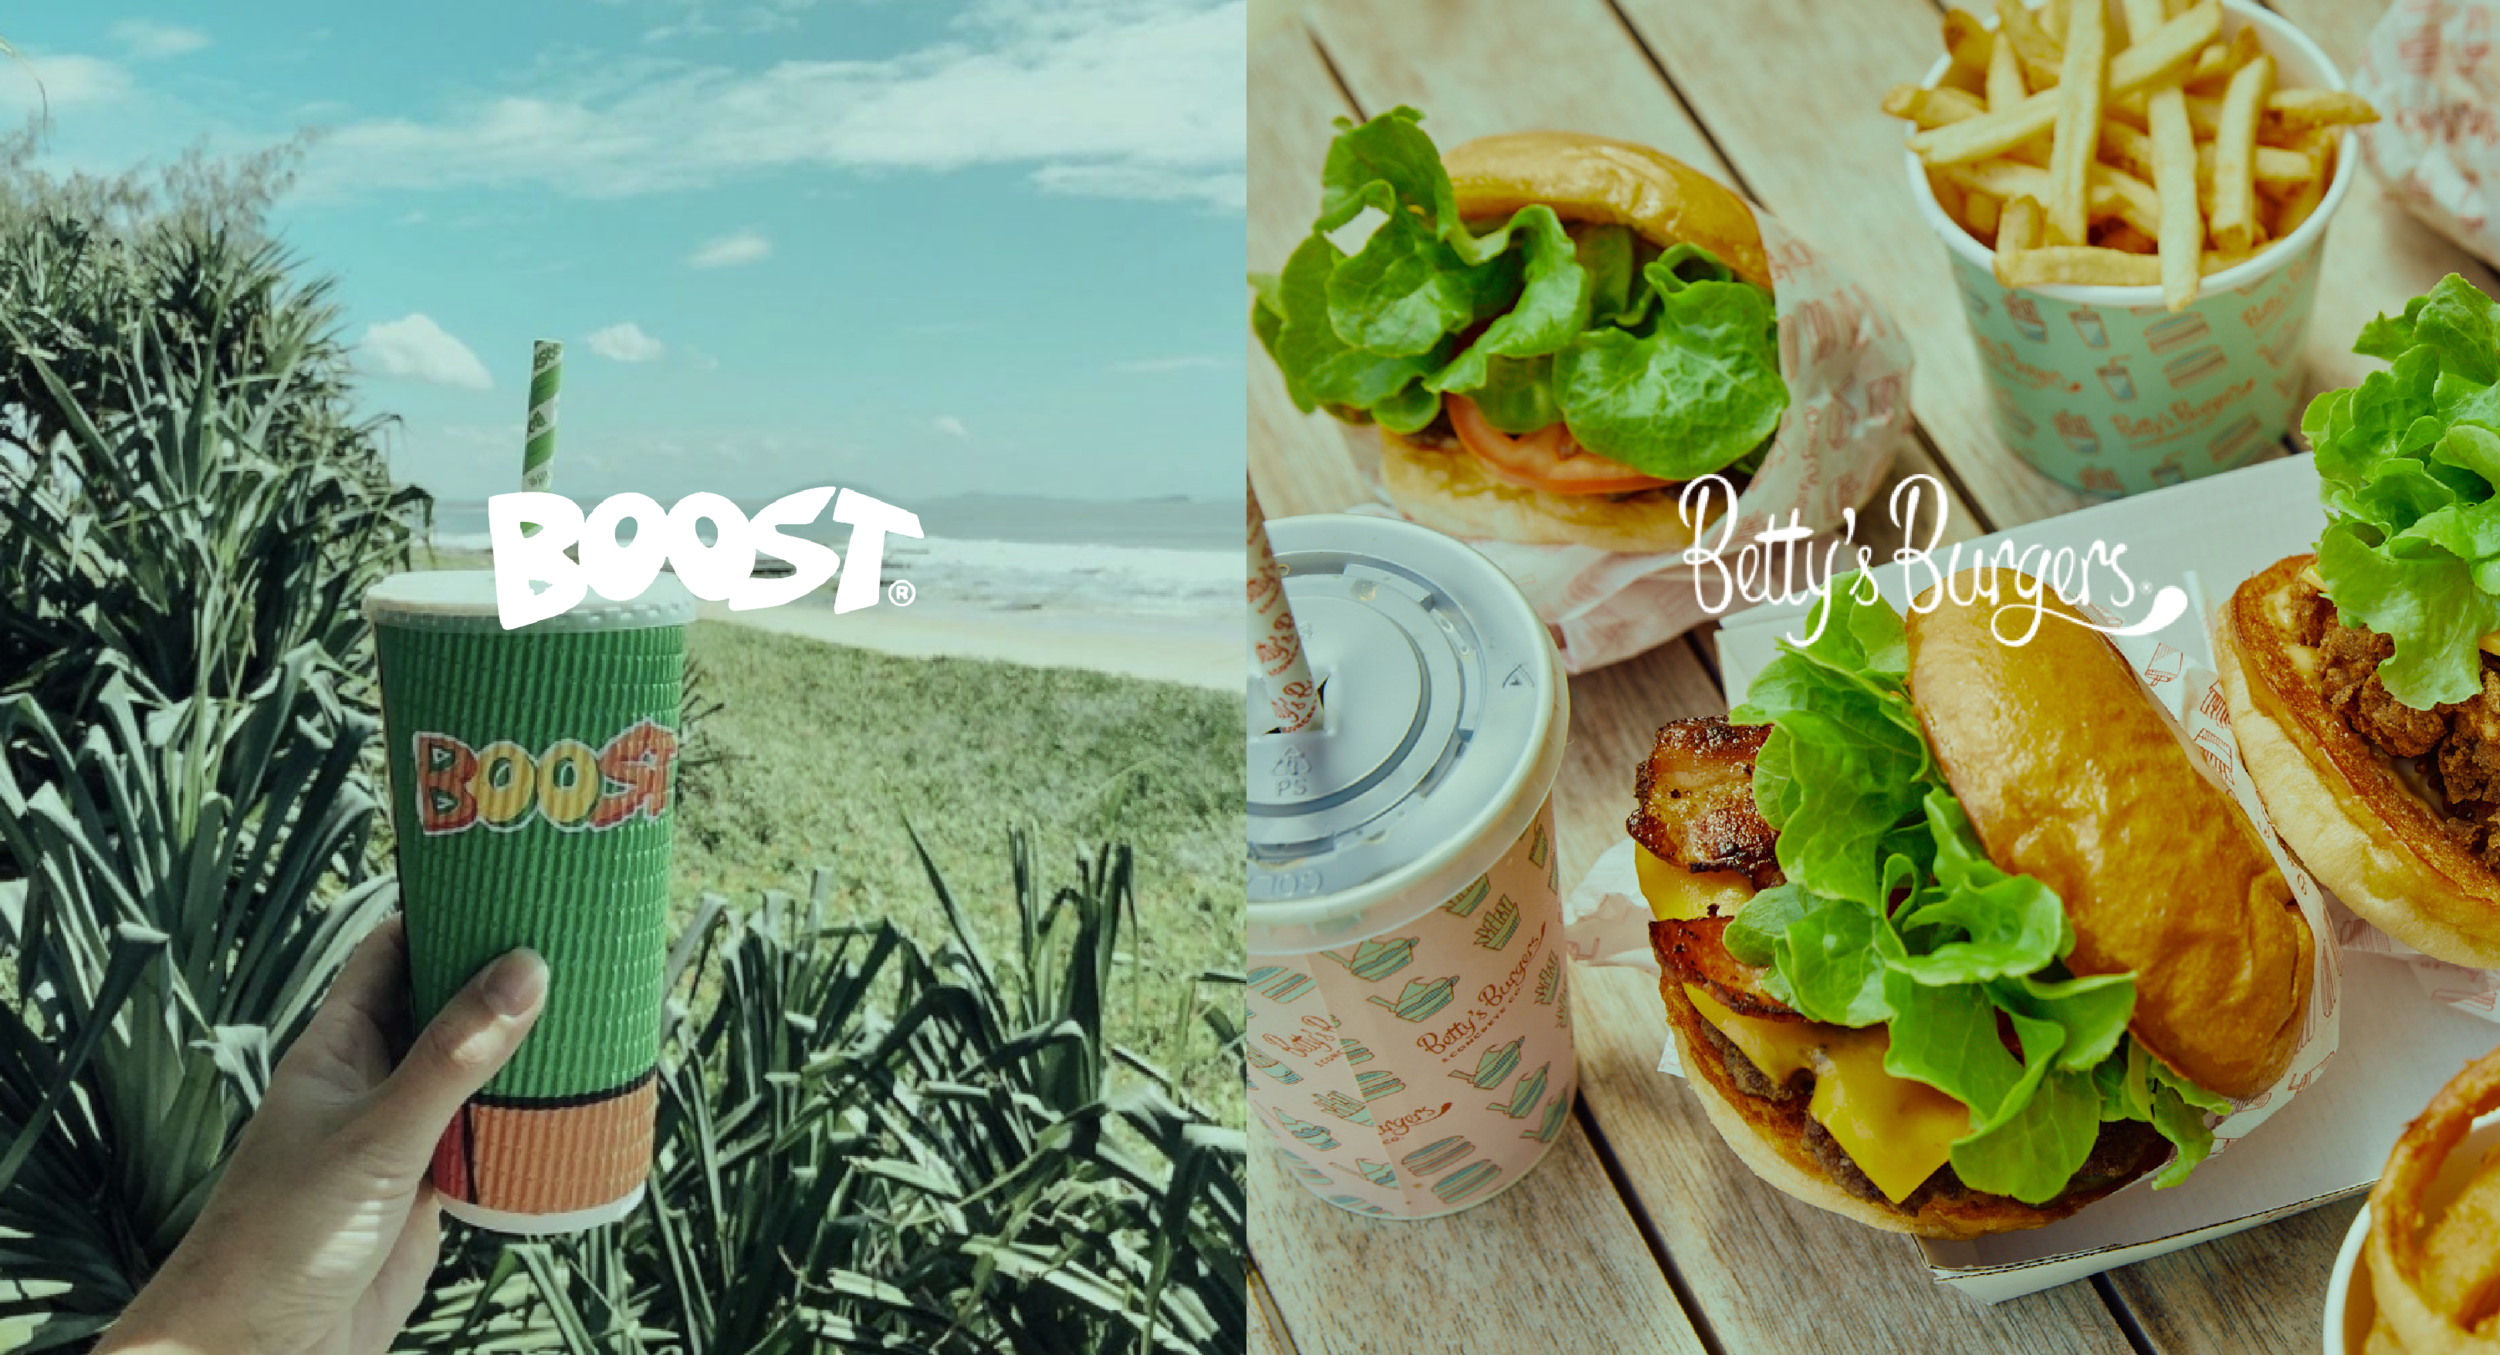 Boost Juice and Bettys Burgers Graphic Digital Design Work